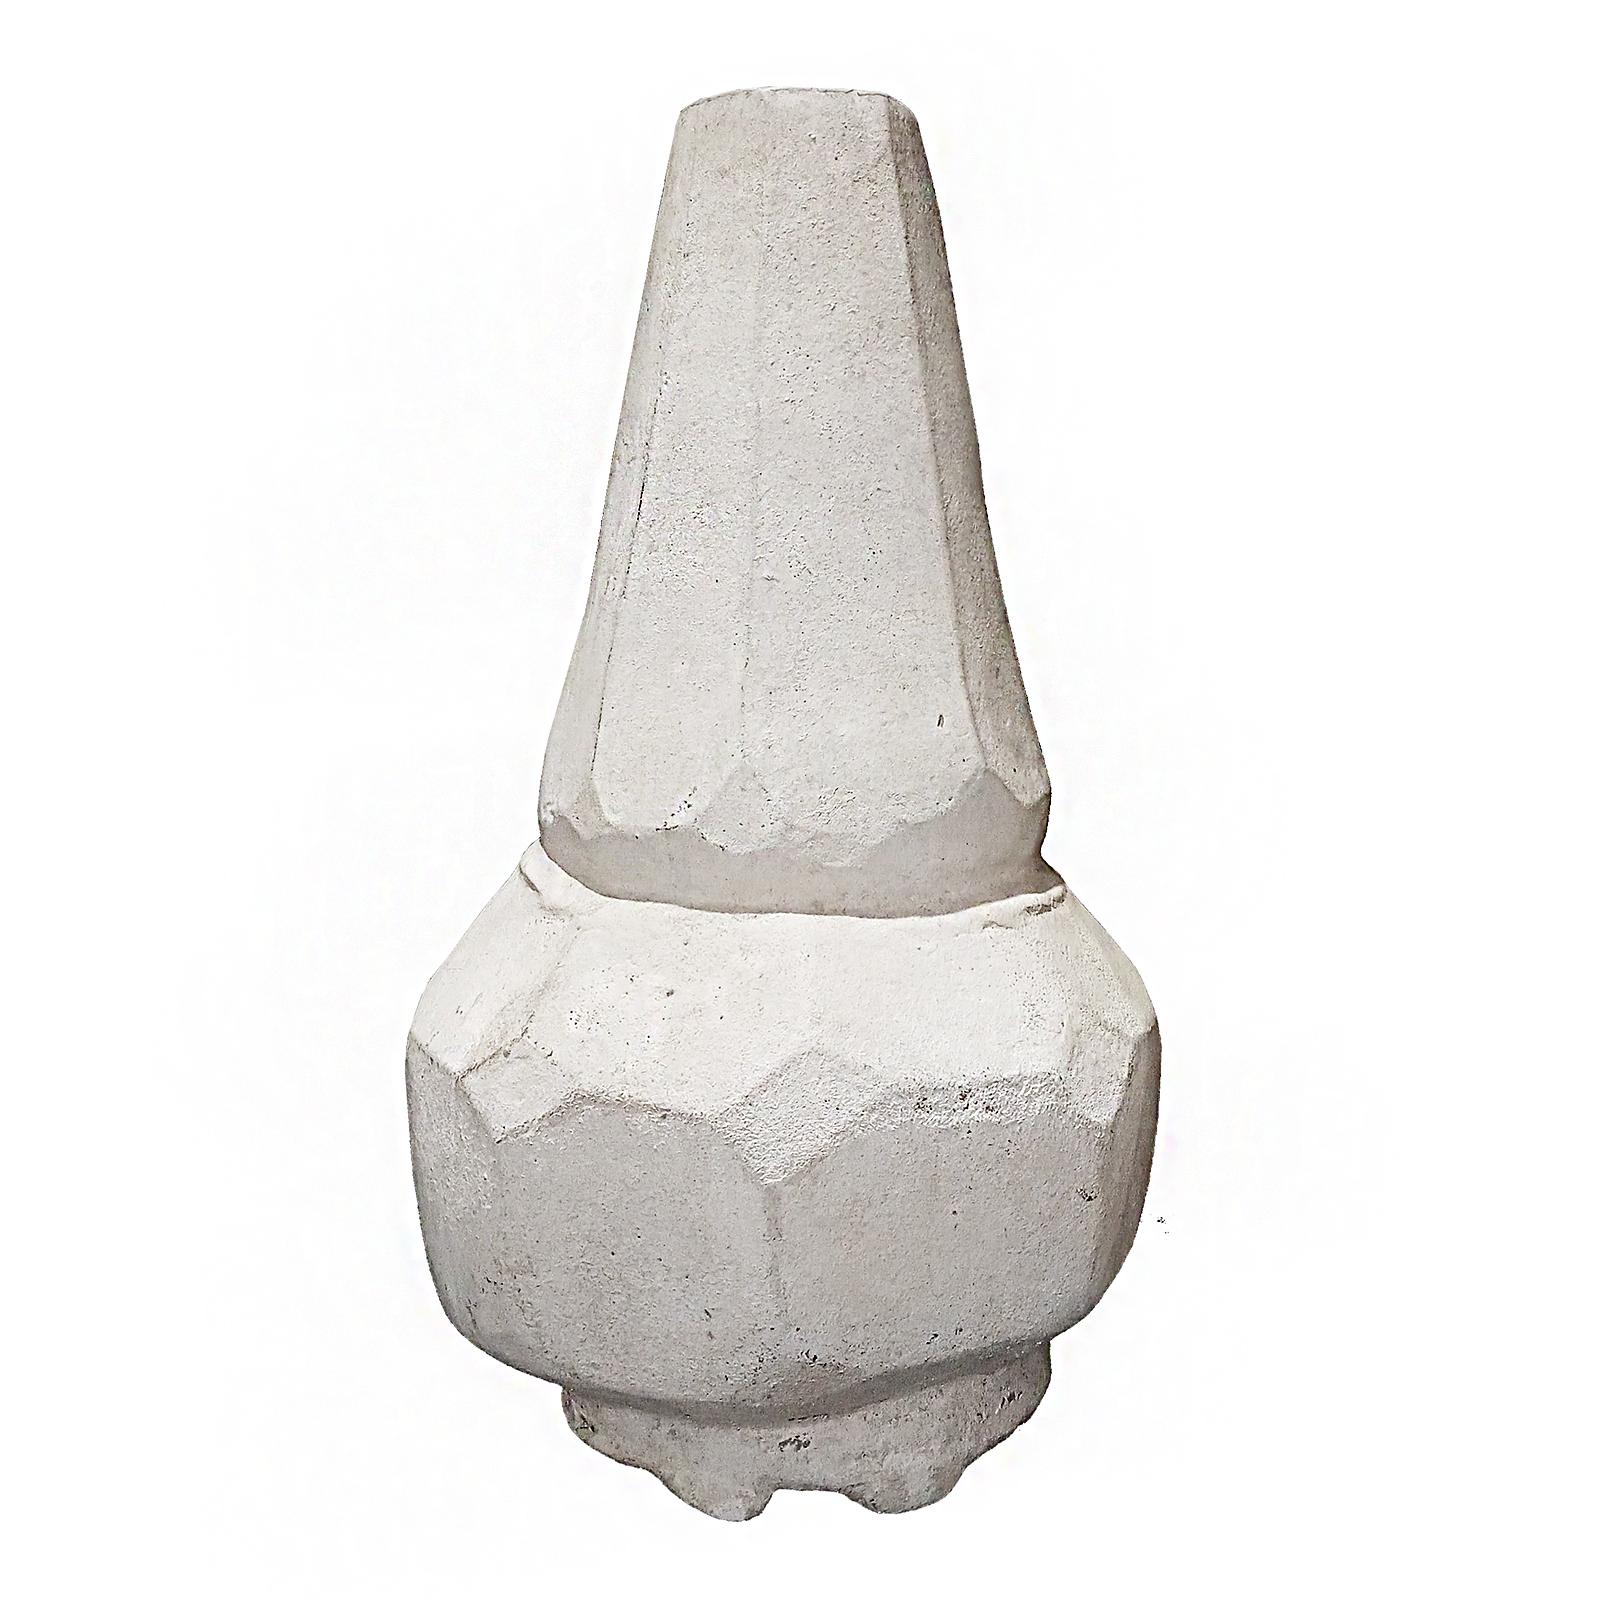 A ceramic vase from Thailand in geometric shape, with white rustic glaze. Contemporary. 

While the golden age of Thai ceramics ended around the 15-16th Centuries, local craftsmen learned the art through generations, later producing smaller numbers